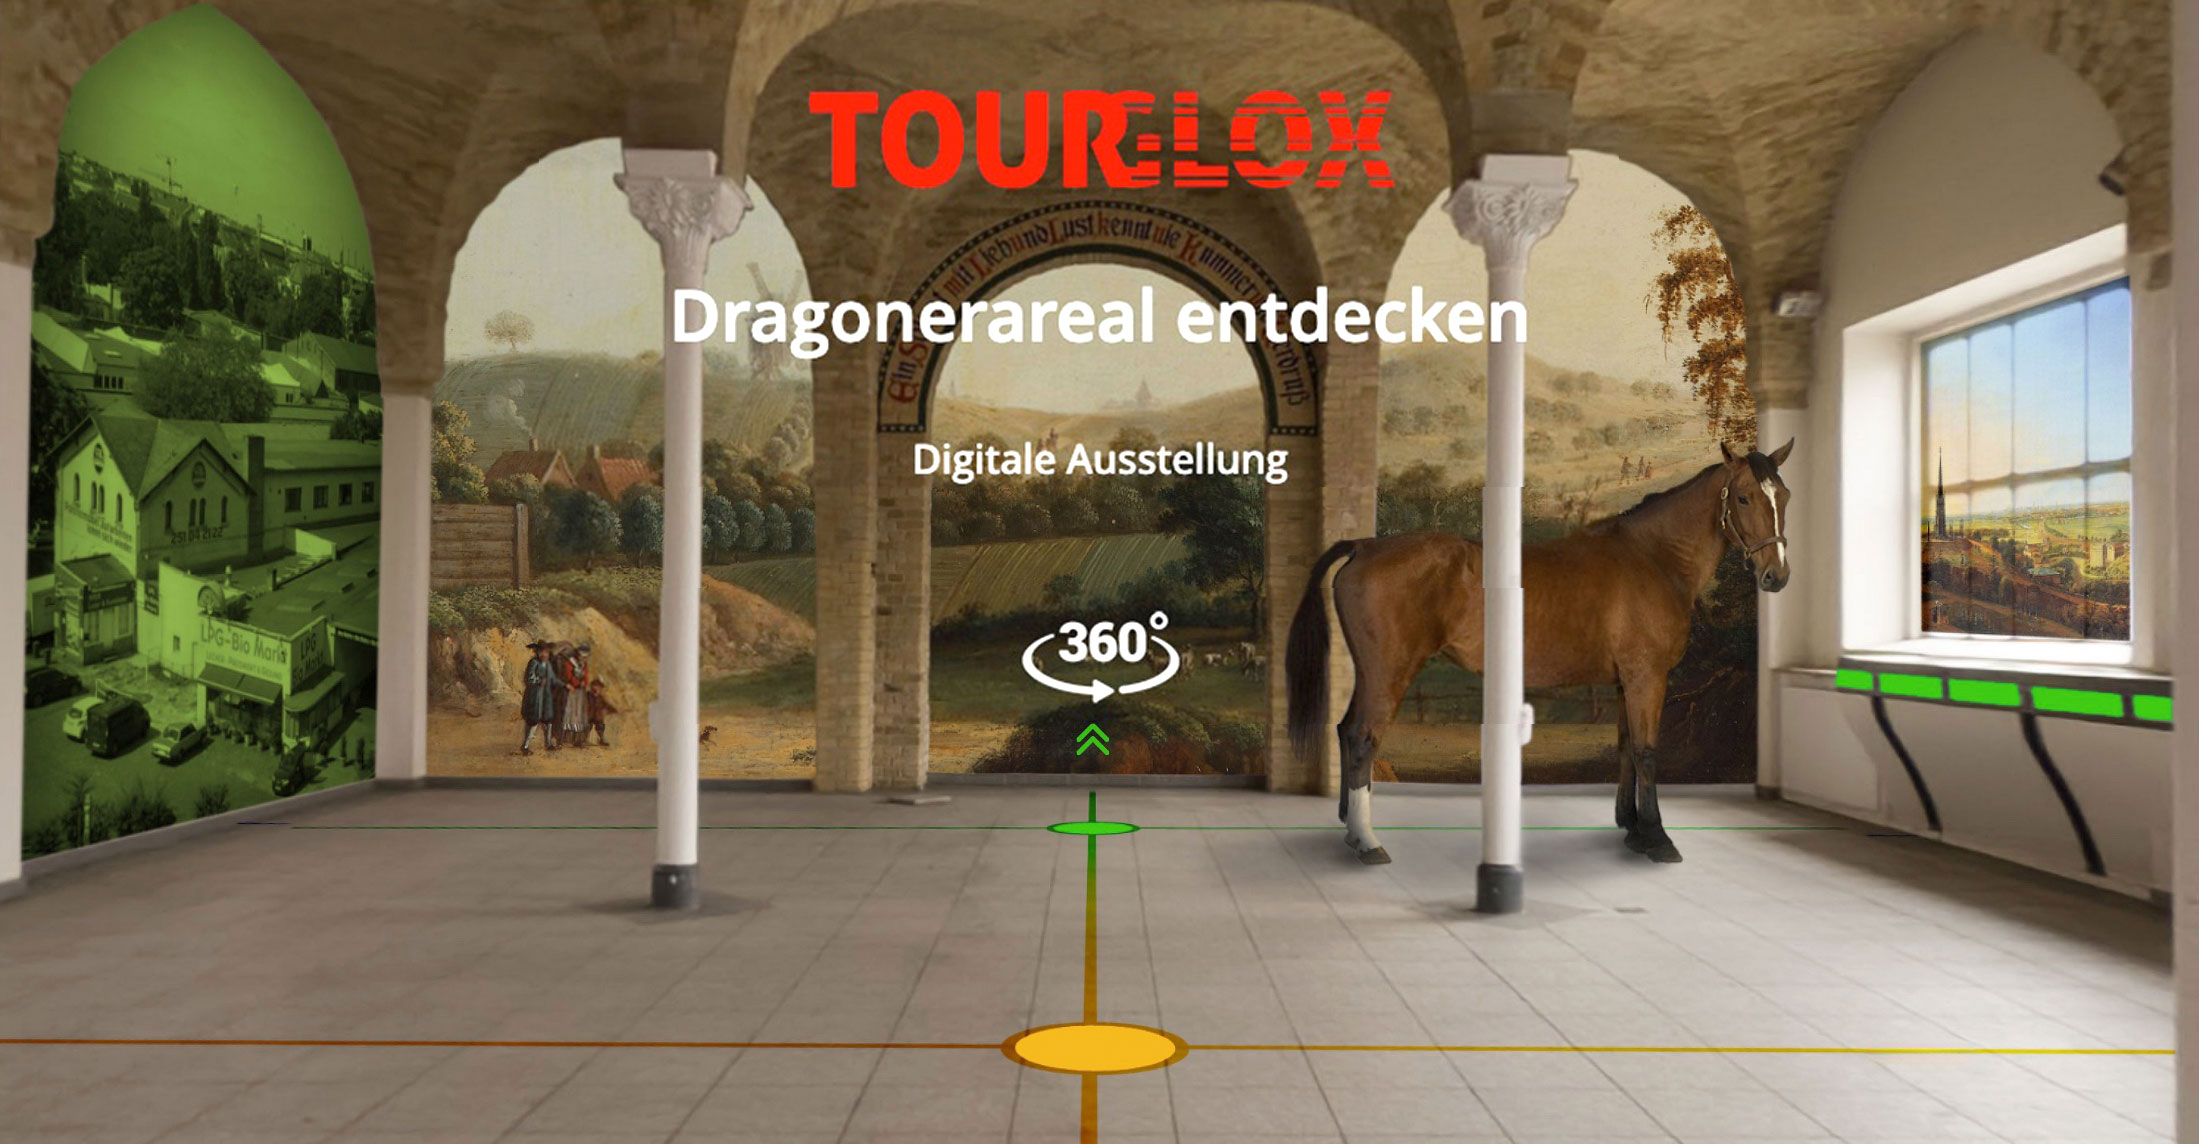 Discover the Dragonerareal in 360°